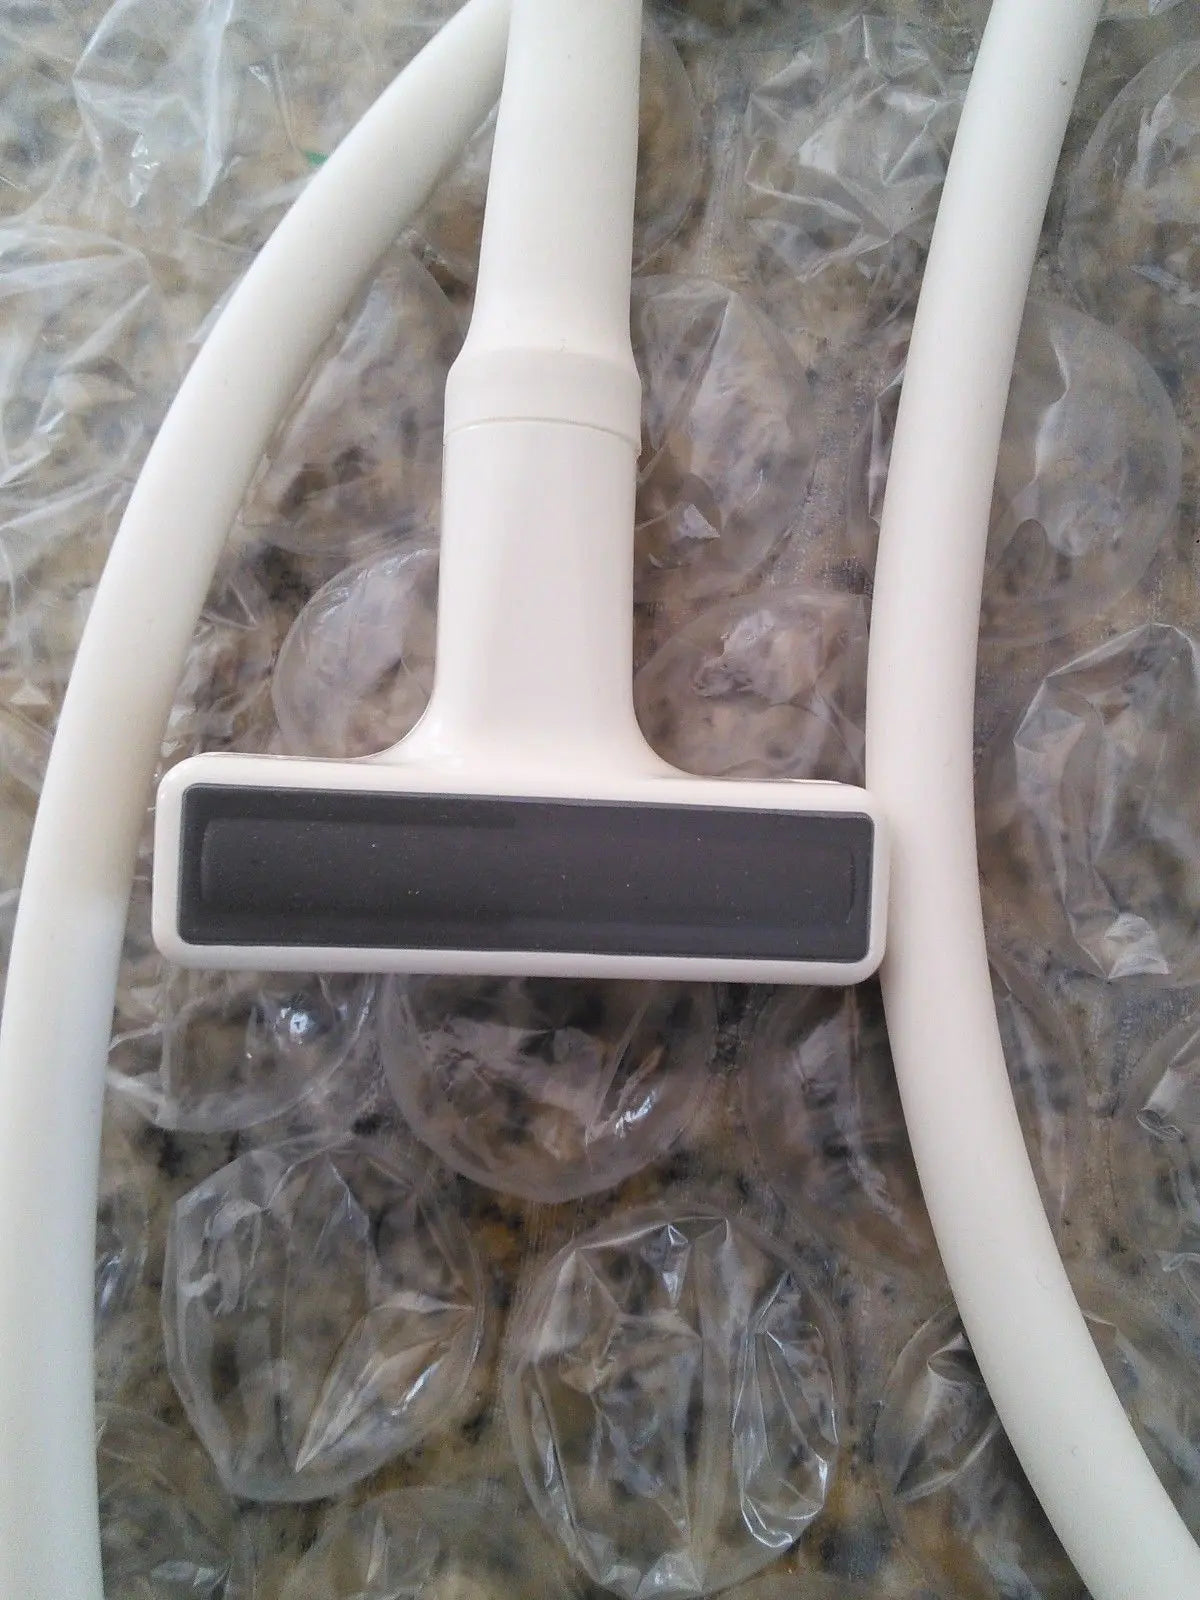 GE T739 Intraoperative 6.7/D5 0MHz Ultrasound Transducer Probe DIAGNOSTIC ULTRASOUND MACHINES FOR SALE